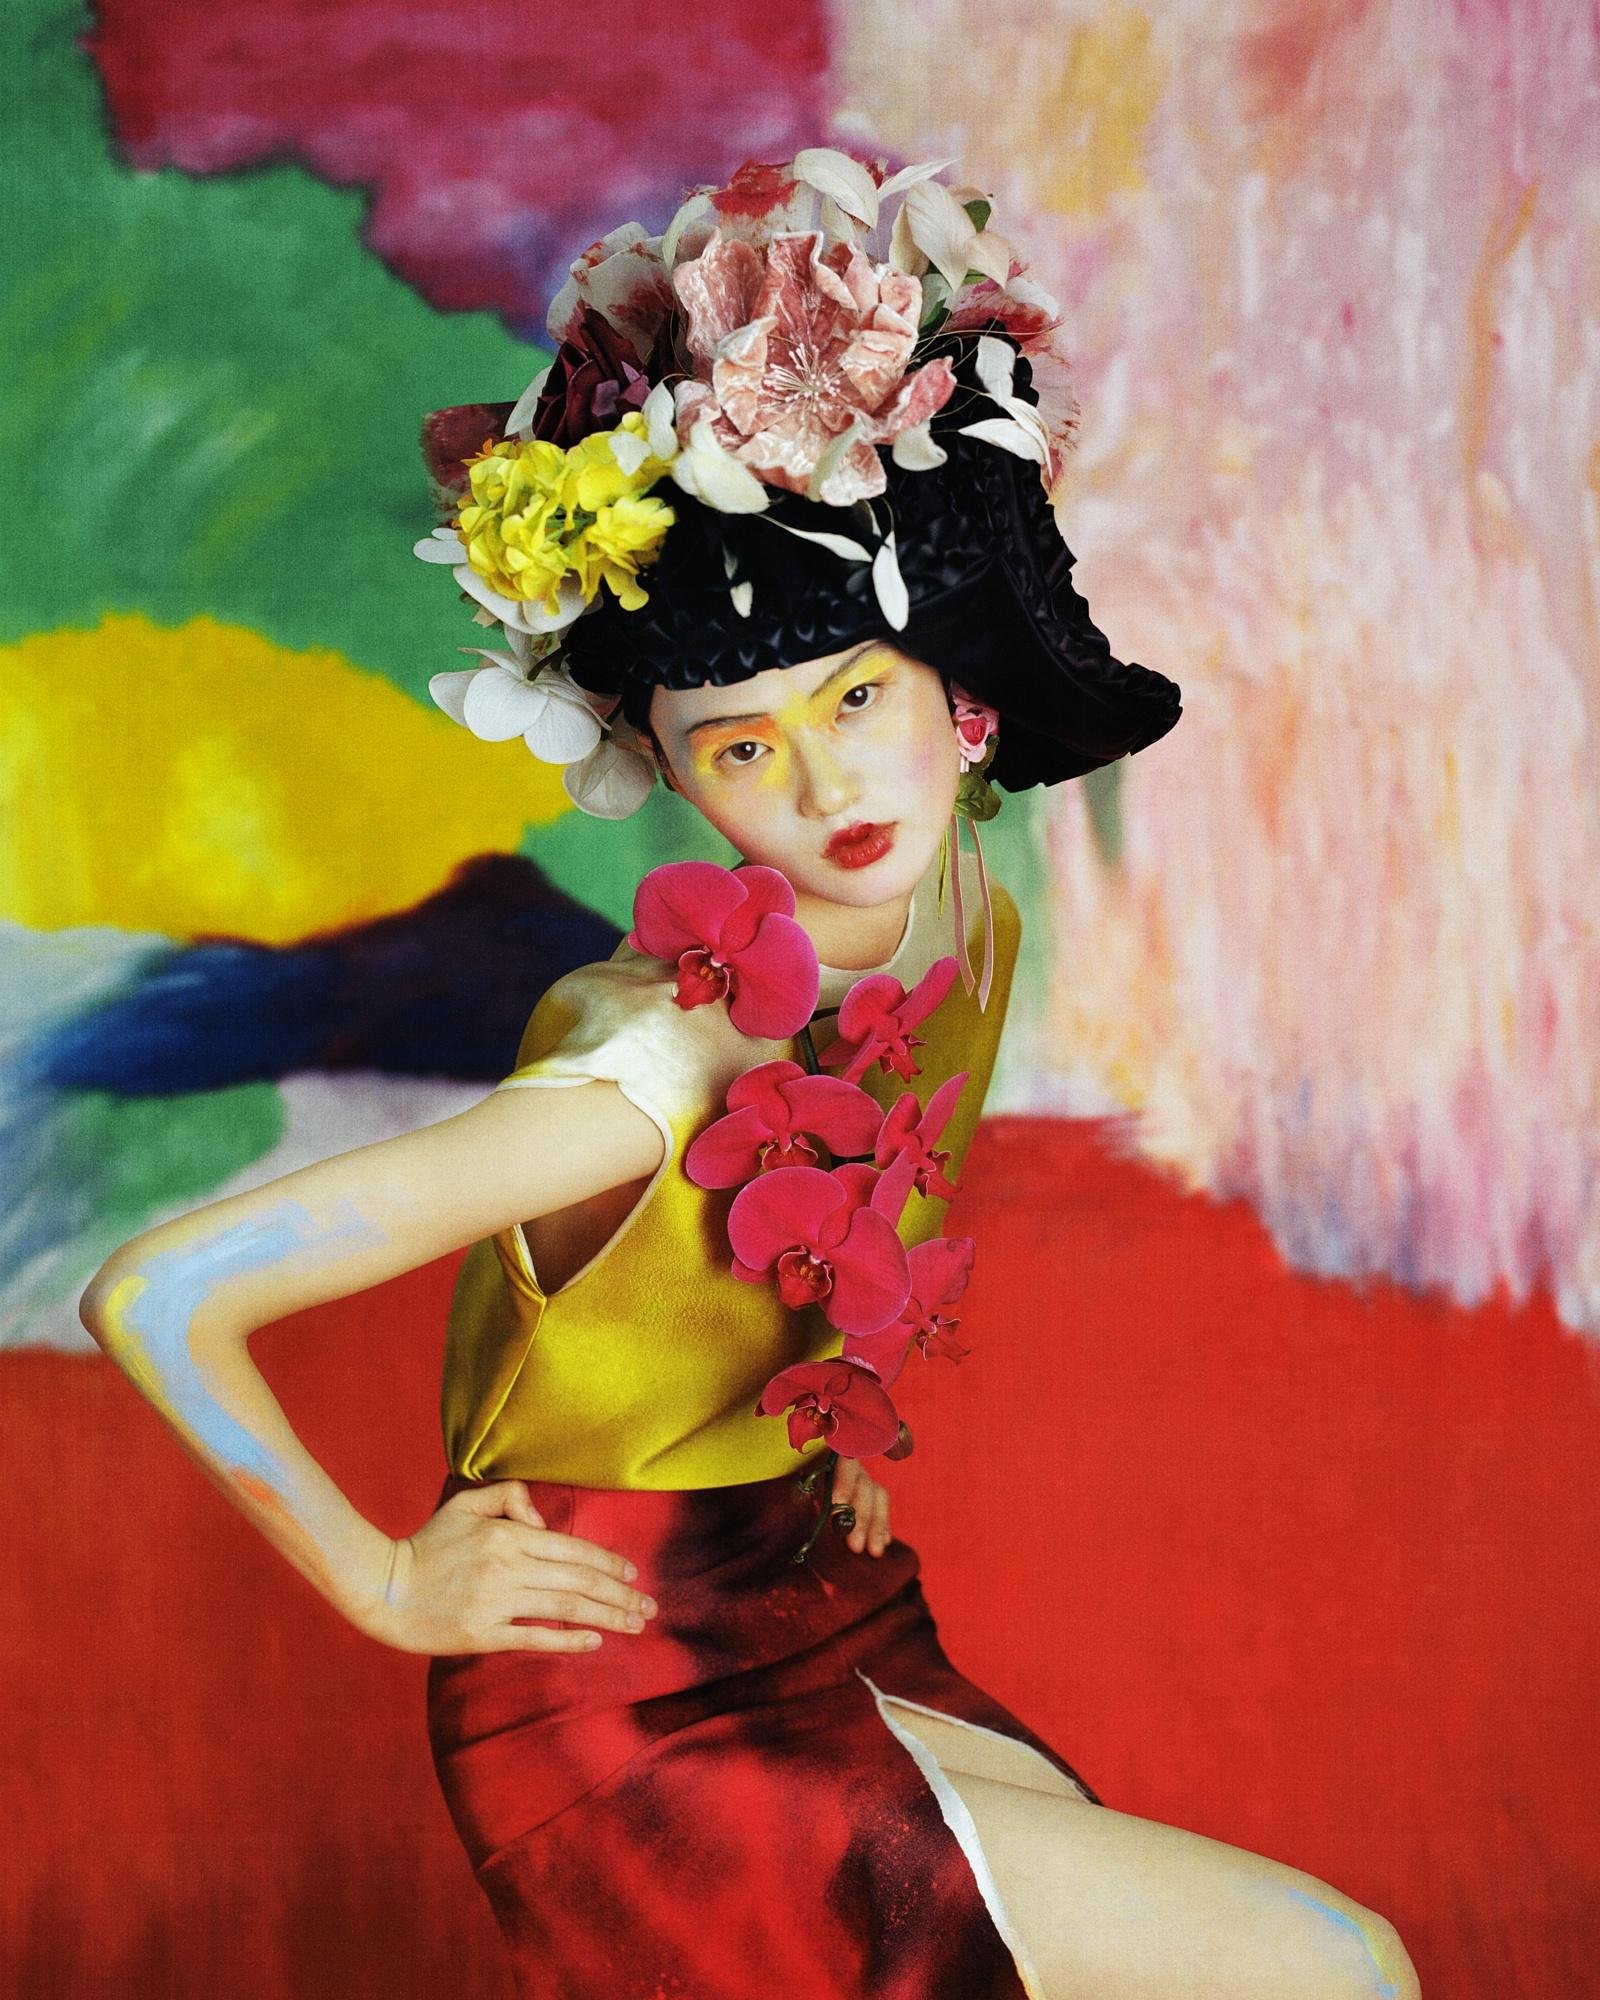  He Cong for Marie Claire China inspired by Henri Matisse  Le chapeau de Paille.  